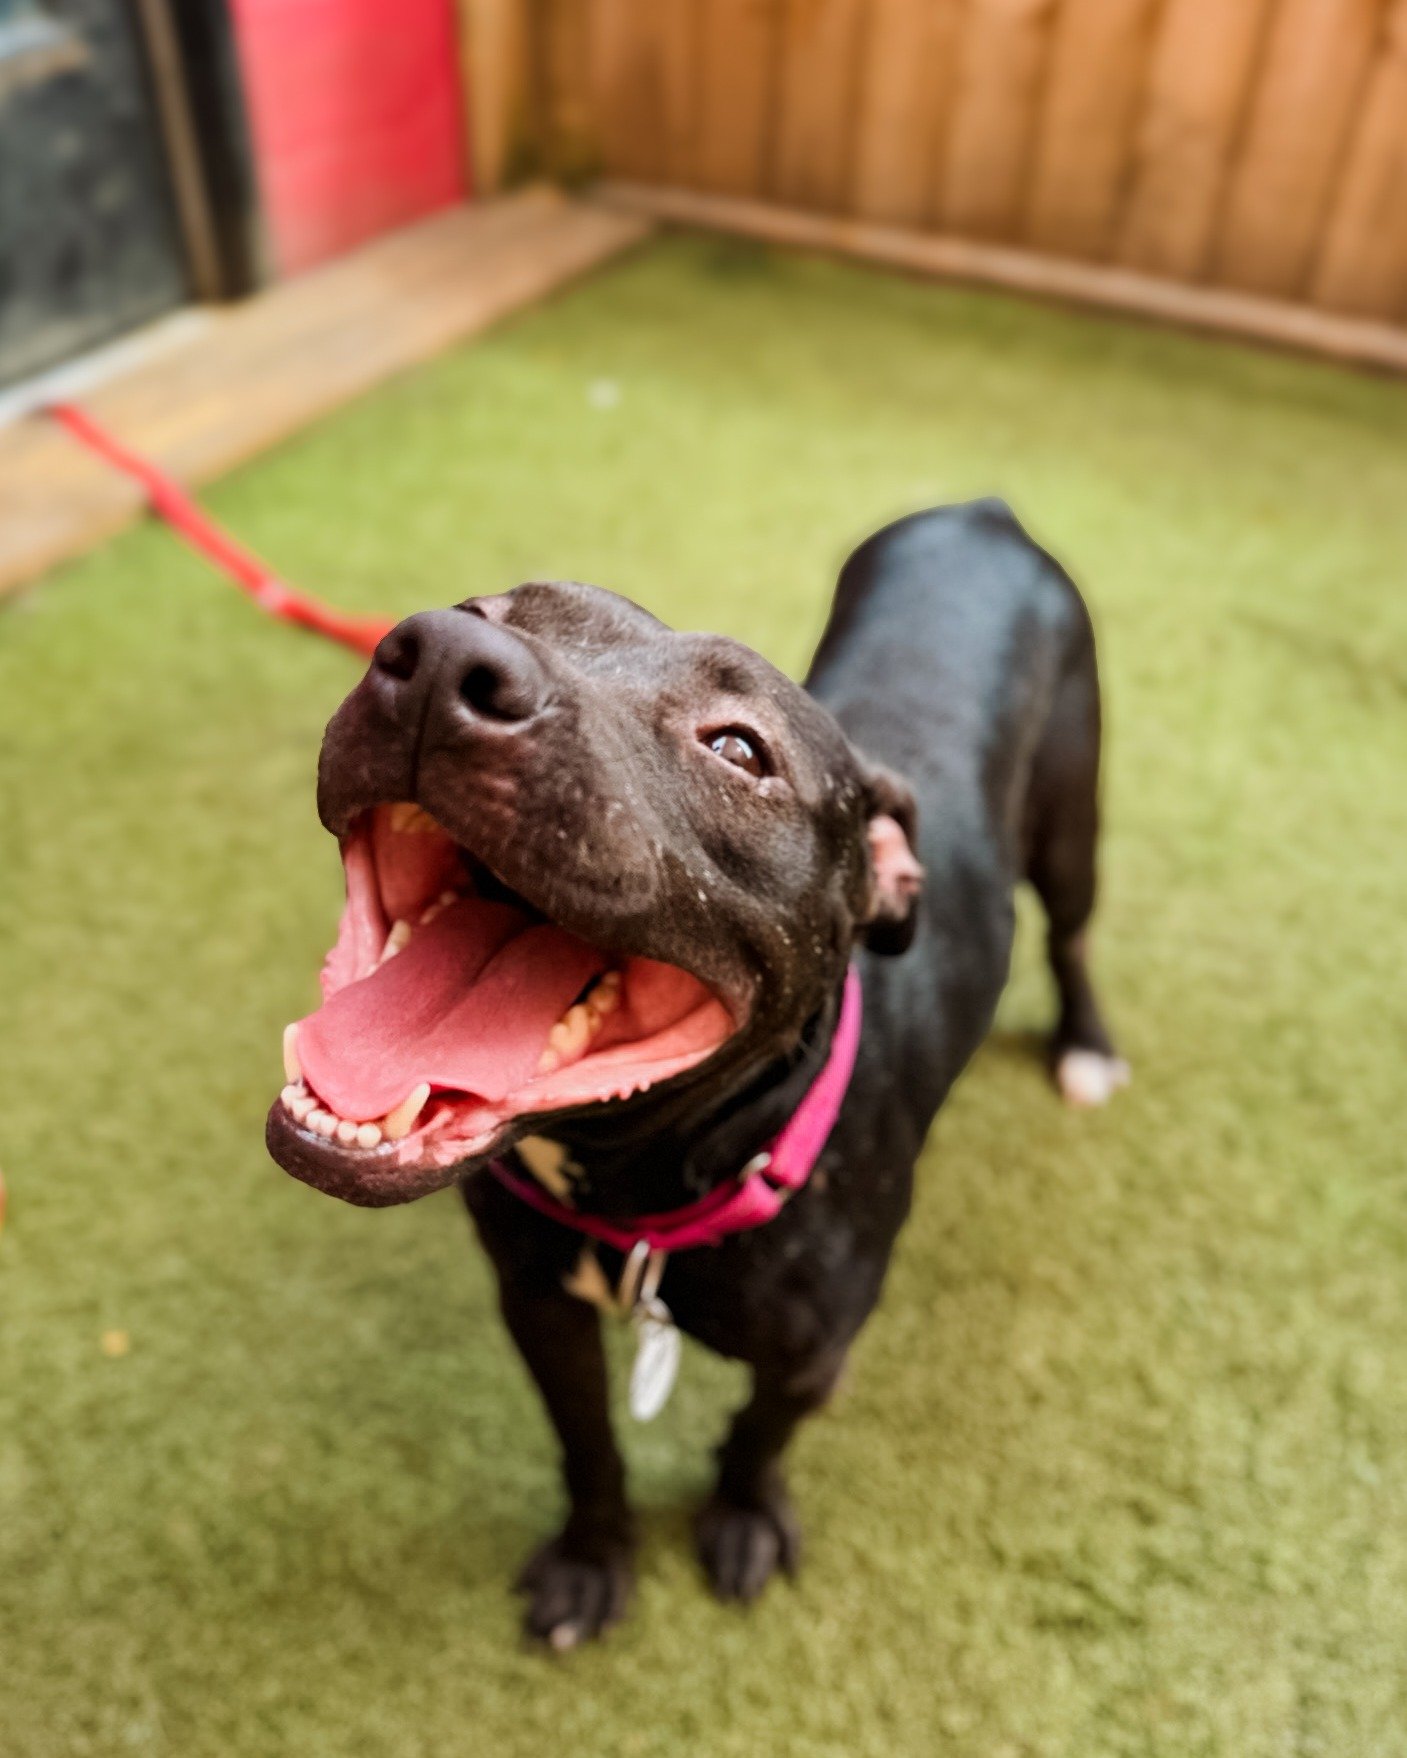 If that giant smile doesn't tell you what an absolute joy Eloise is, her constant tail-wagging sure will. From the vet's office to doggy daycare, her friendly demeanor and sweet nature have her stealing hearts all over town. And hey, we get it&mdash;